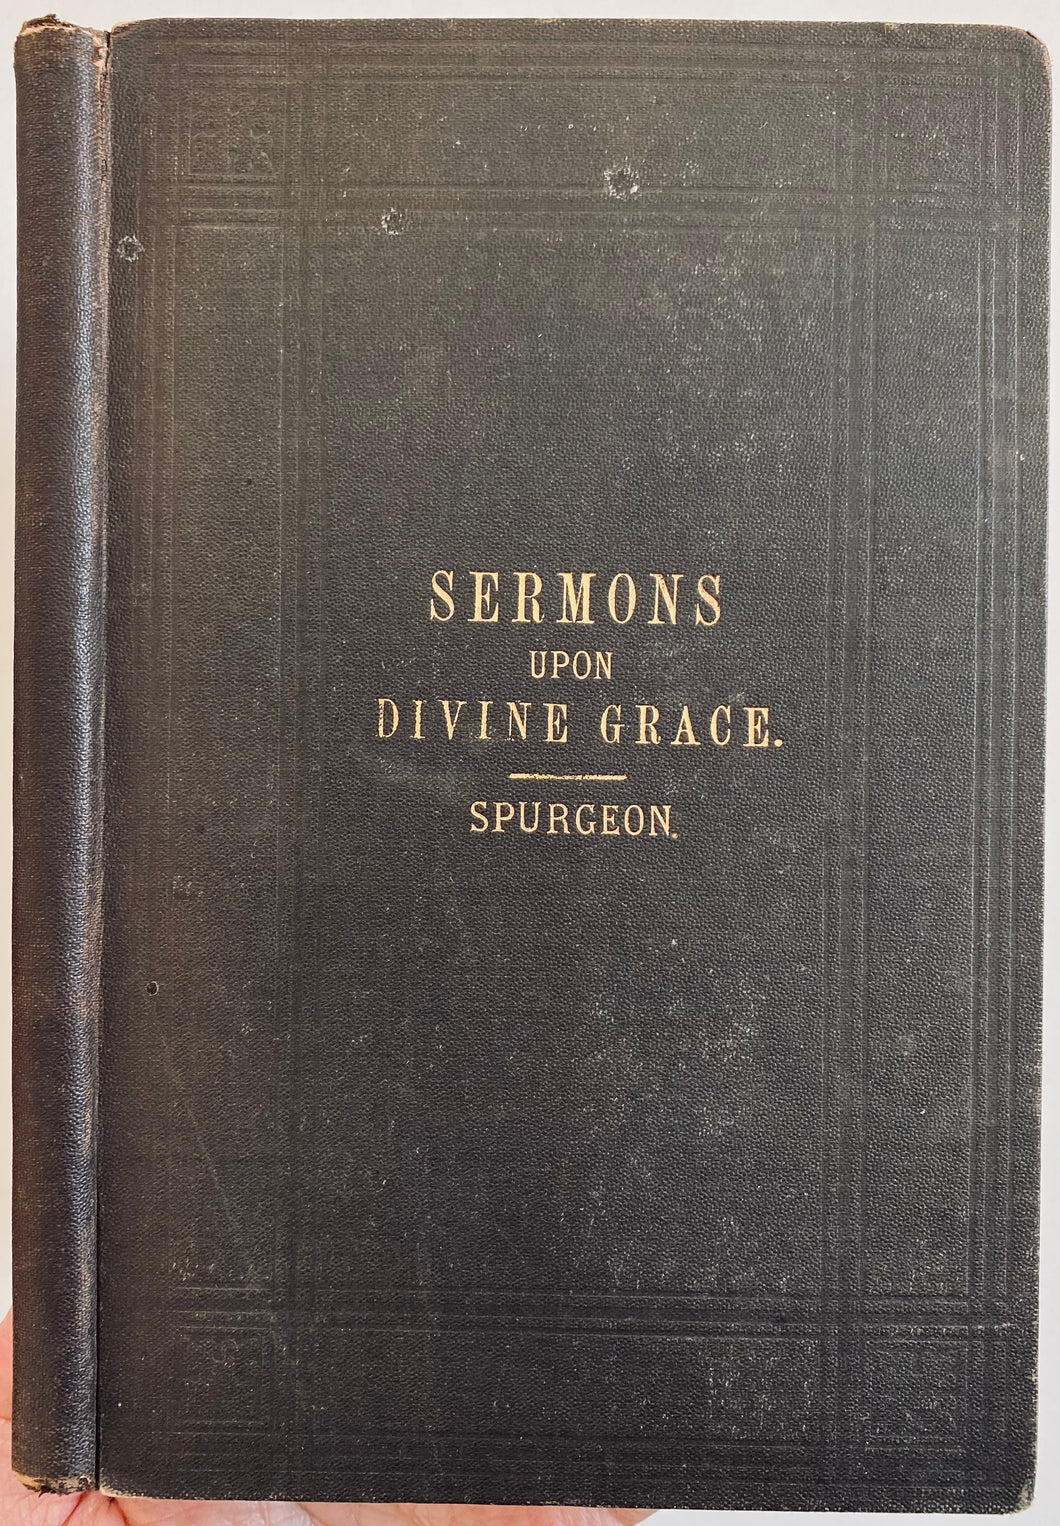 1863 C. H. SPURGEON. Sermons Upon Divine Grace and Human Responsibility. Exceptionally Rare!